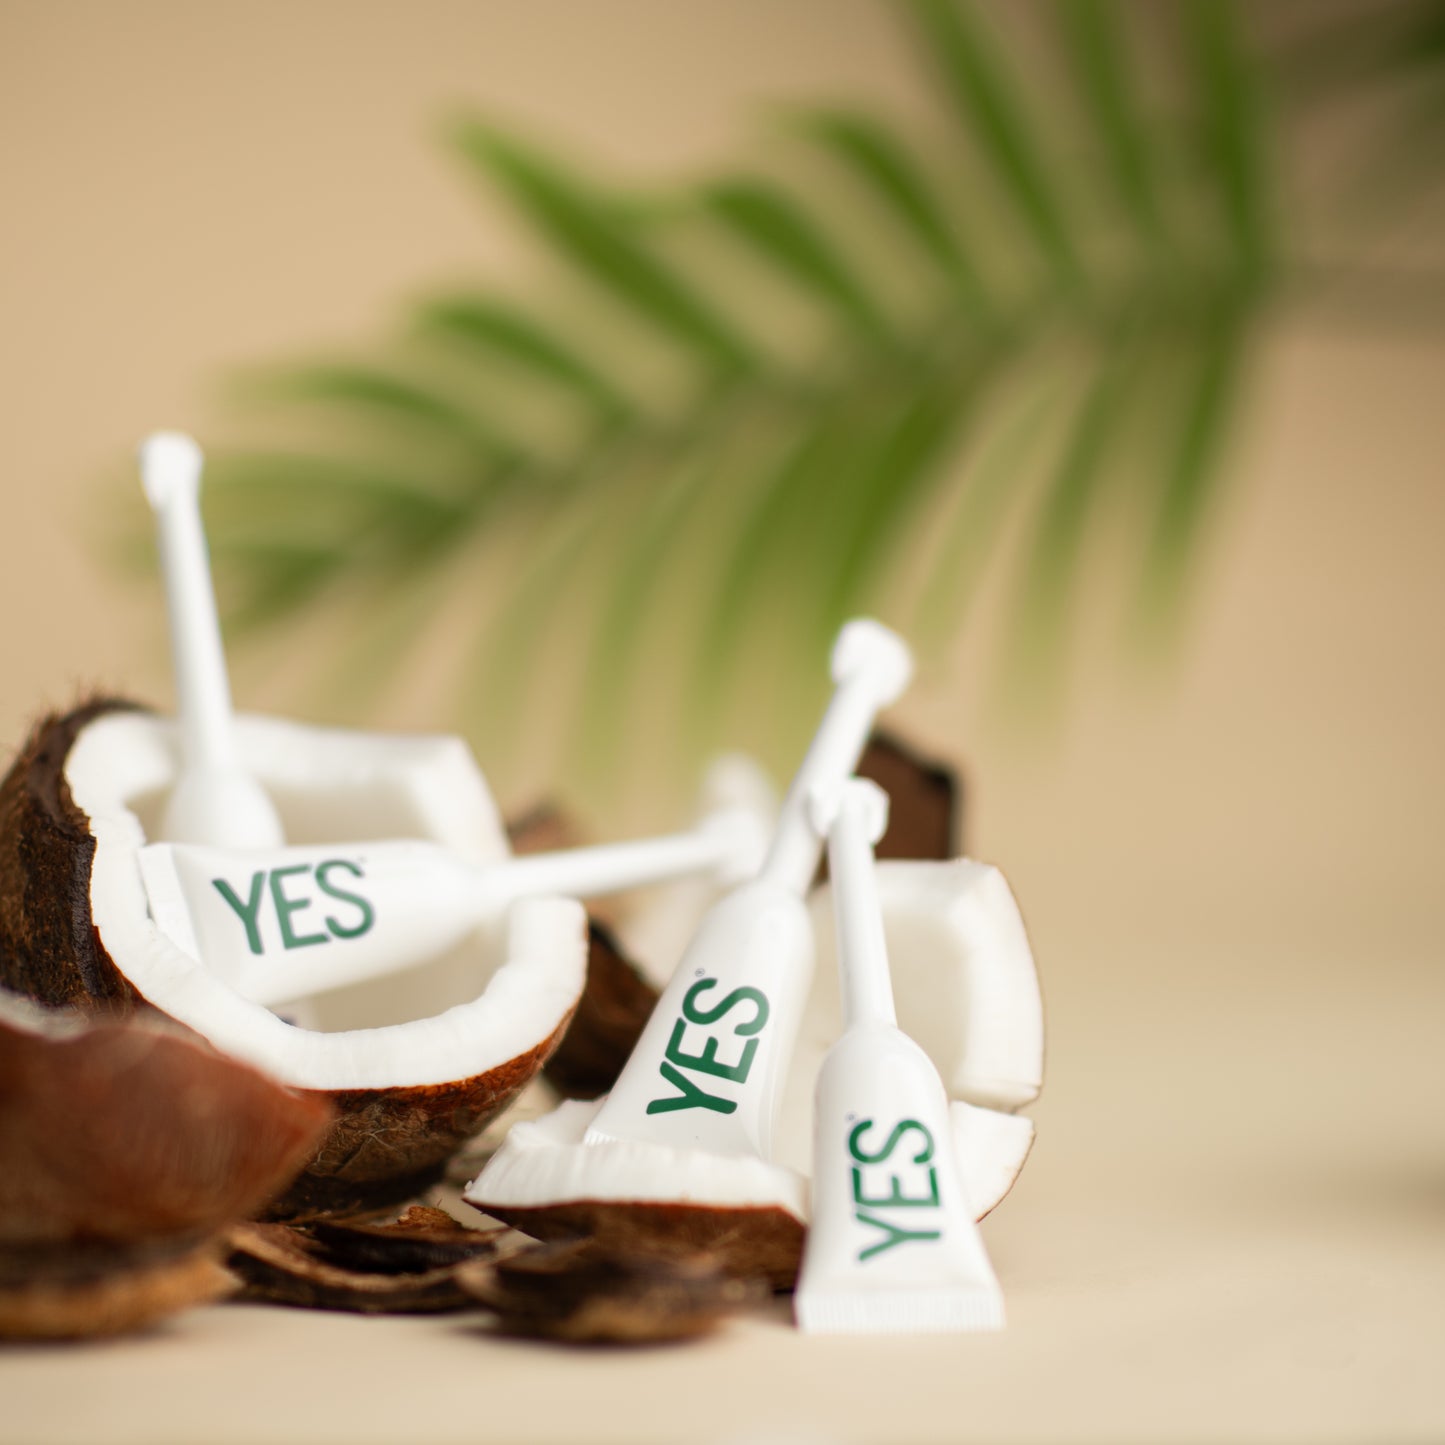 YES COCO plant oil based lubricant applicators laid inside a coconut